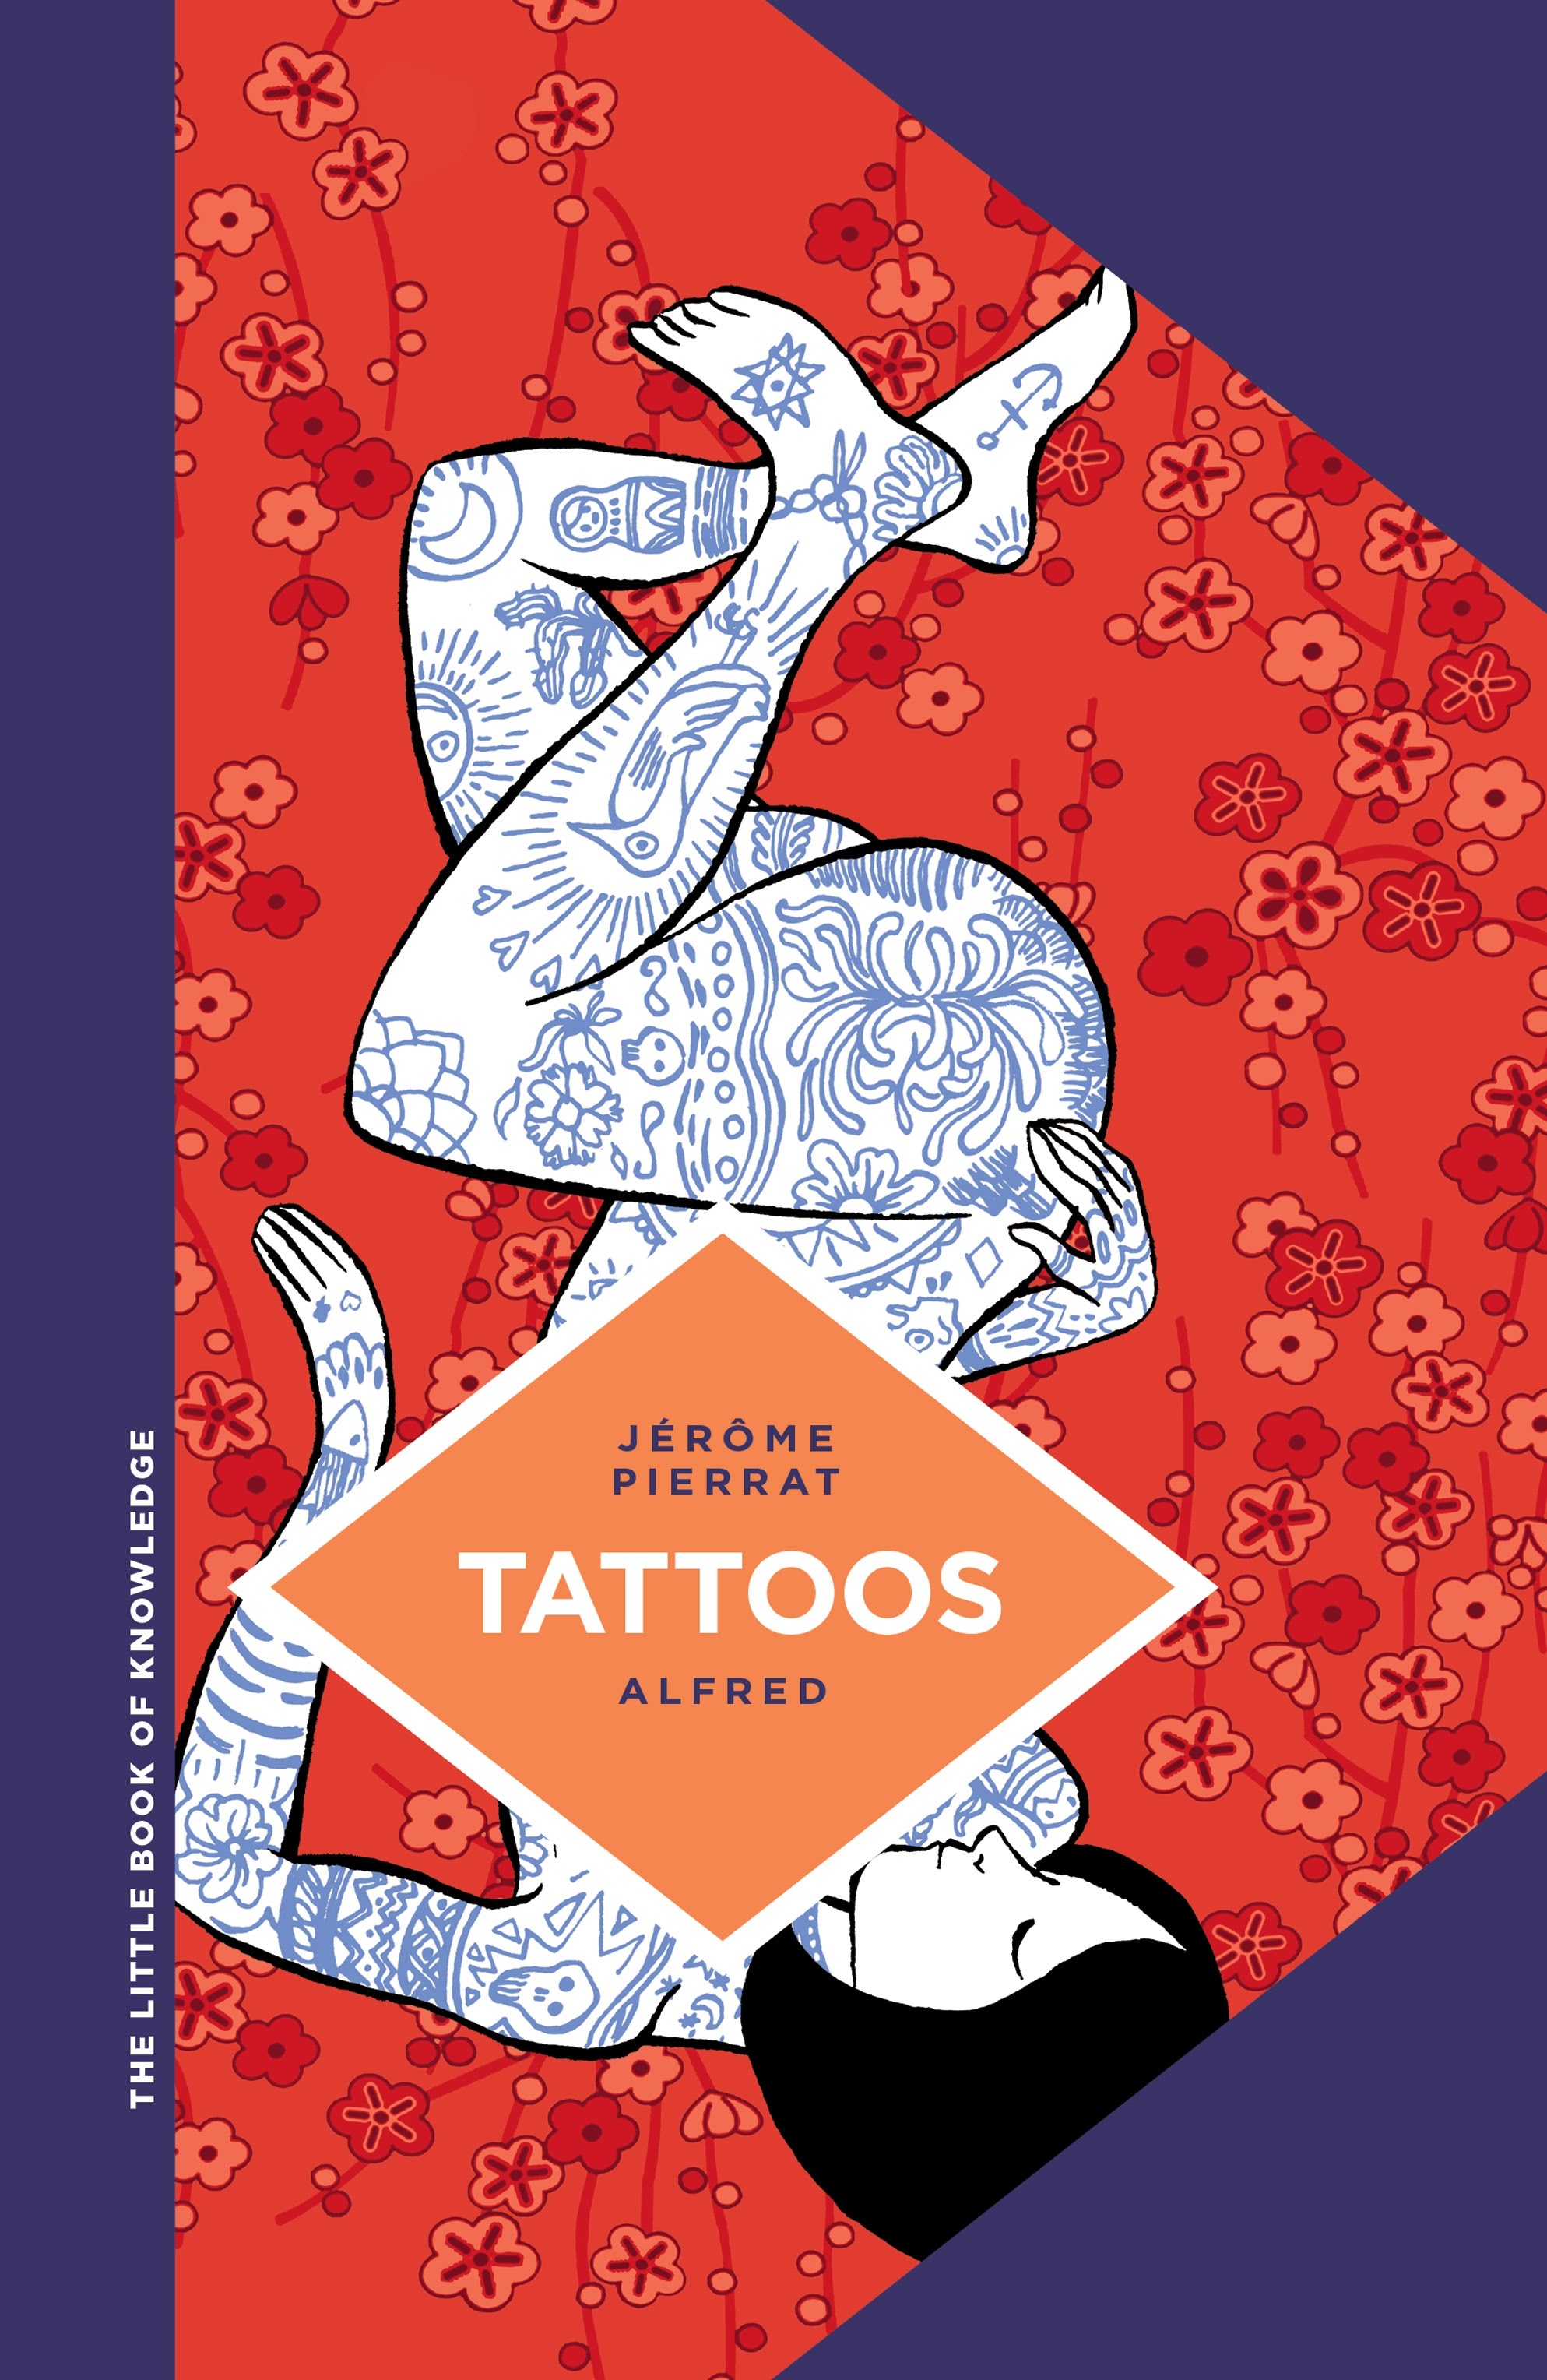 Read online The Little Book of Knowledge: Tattoos comic -  Issue # TPB - 1